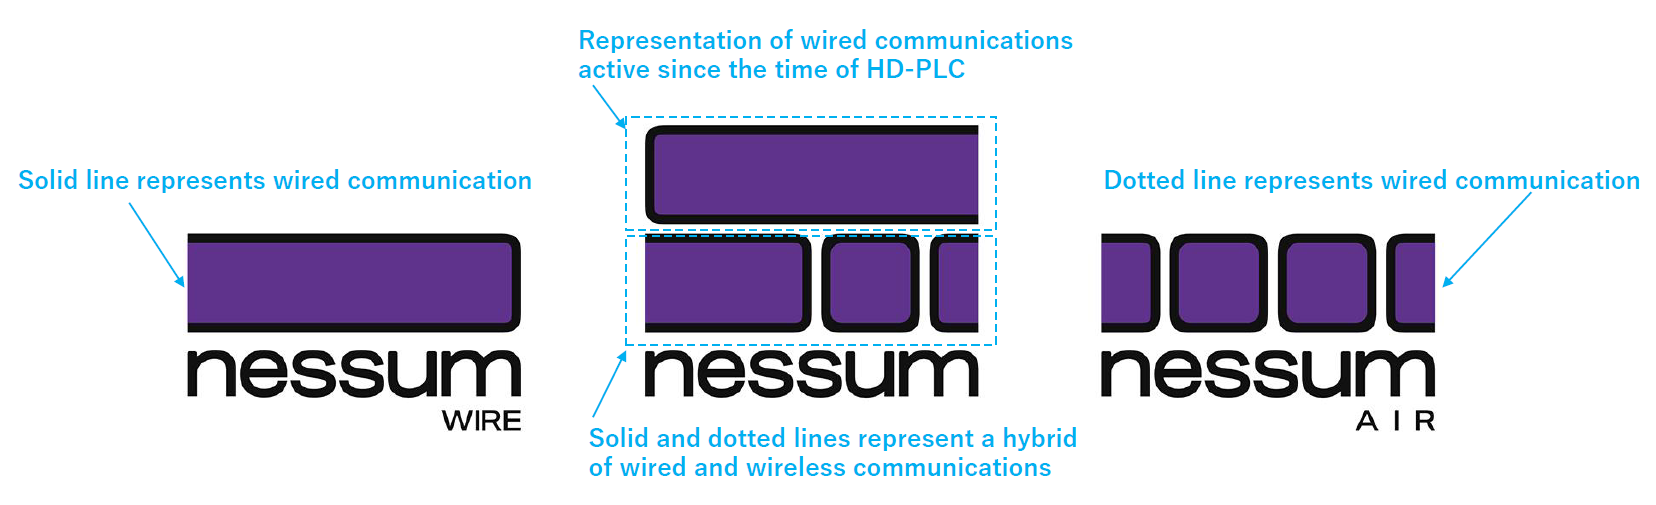 nessum_logo_meaning.png